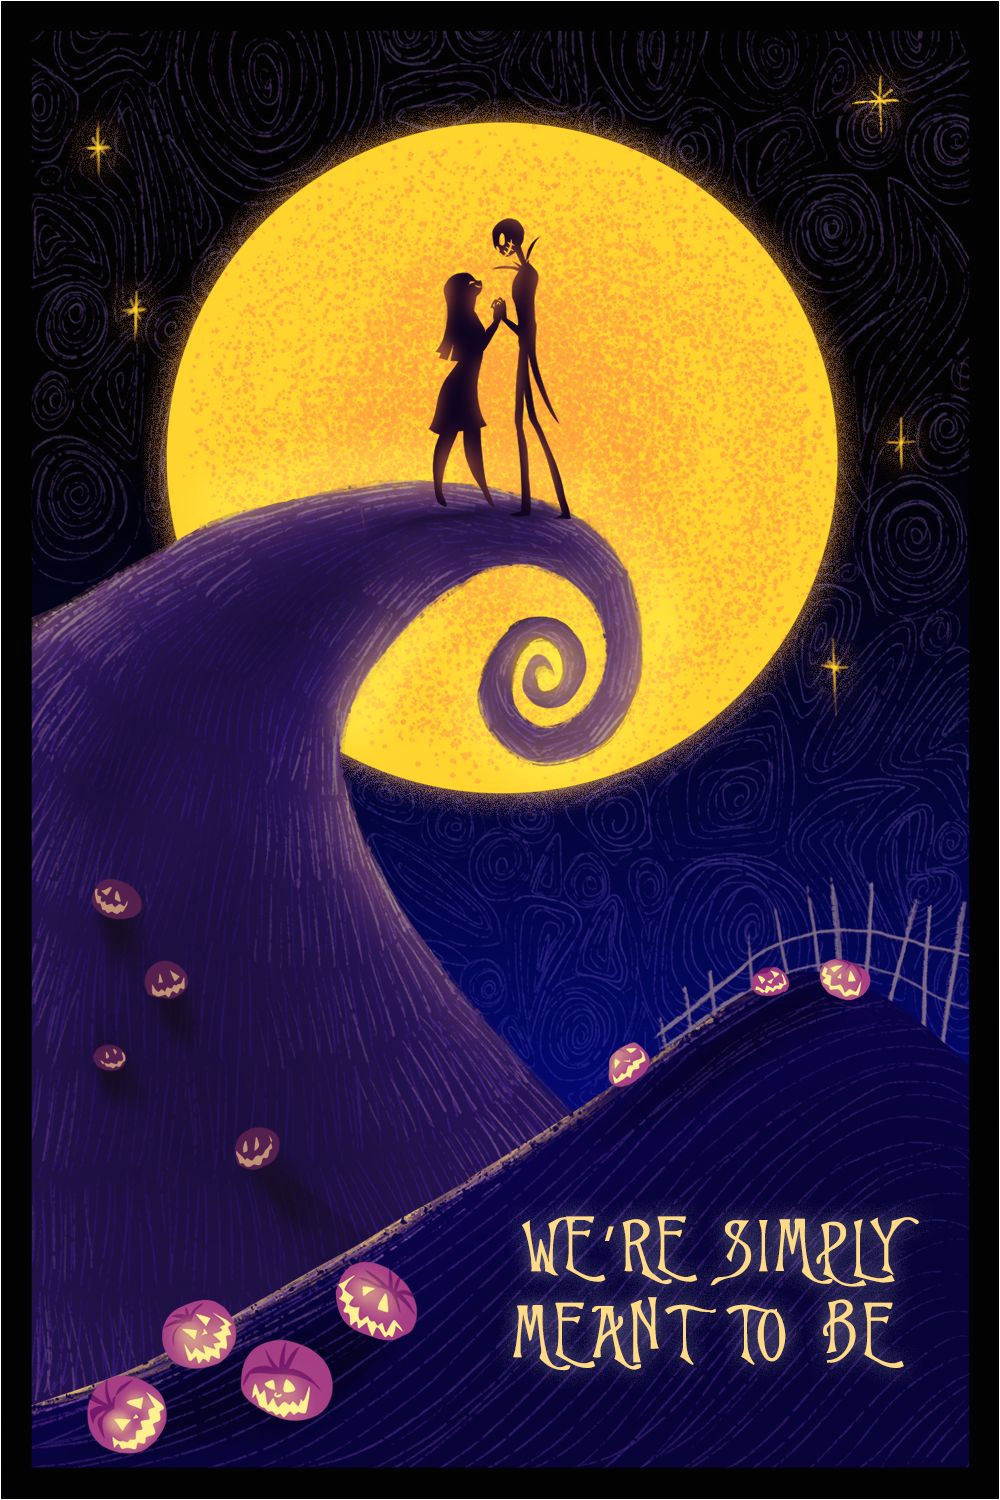 Jack and Sally Valentine Card Adorable Disney Valentine’s Day Cards